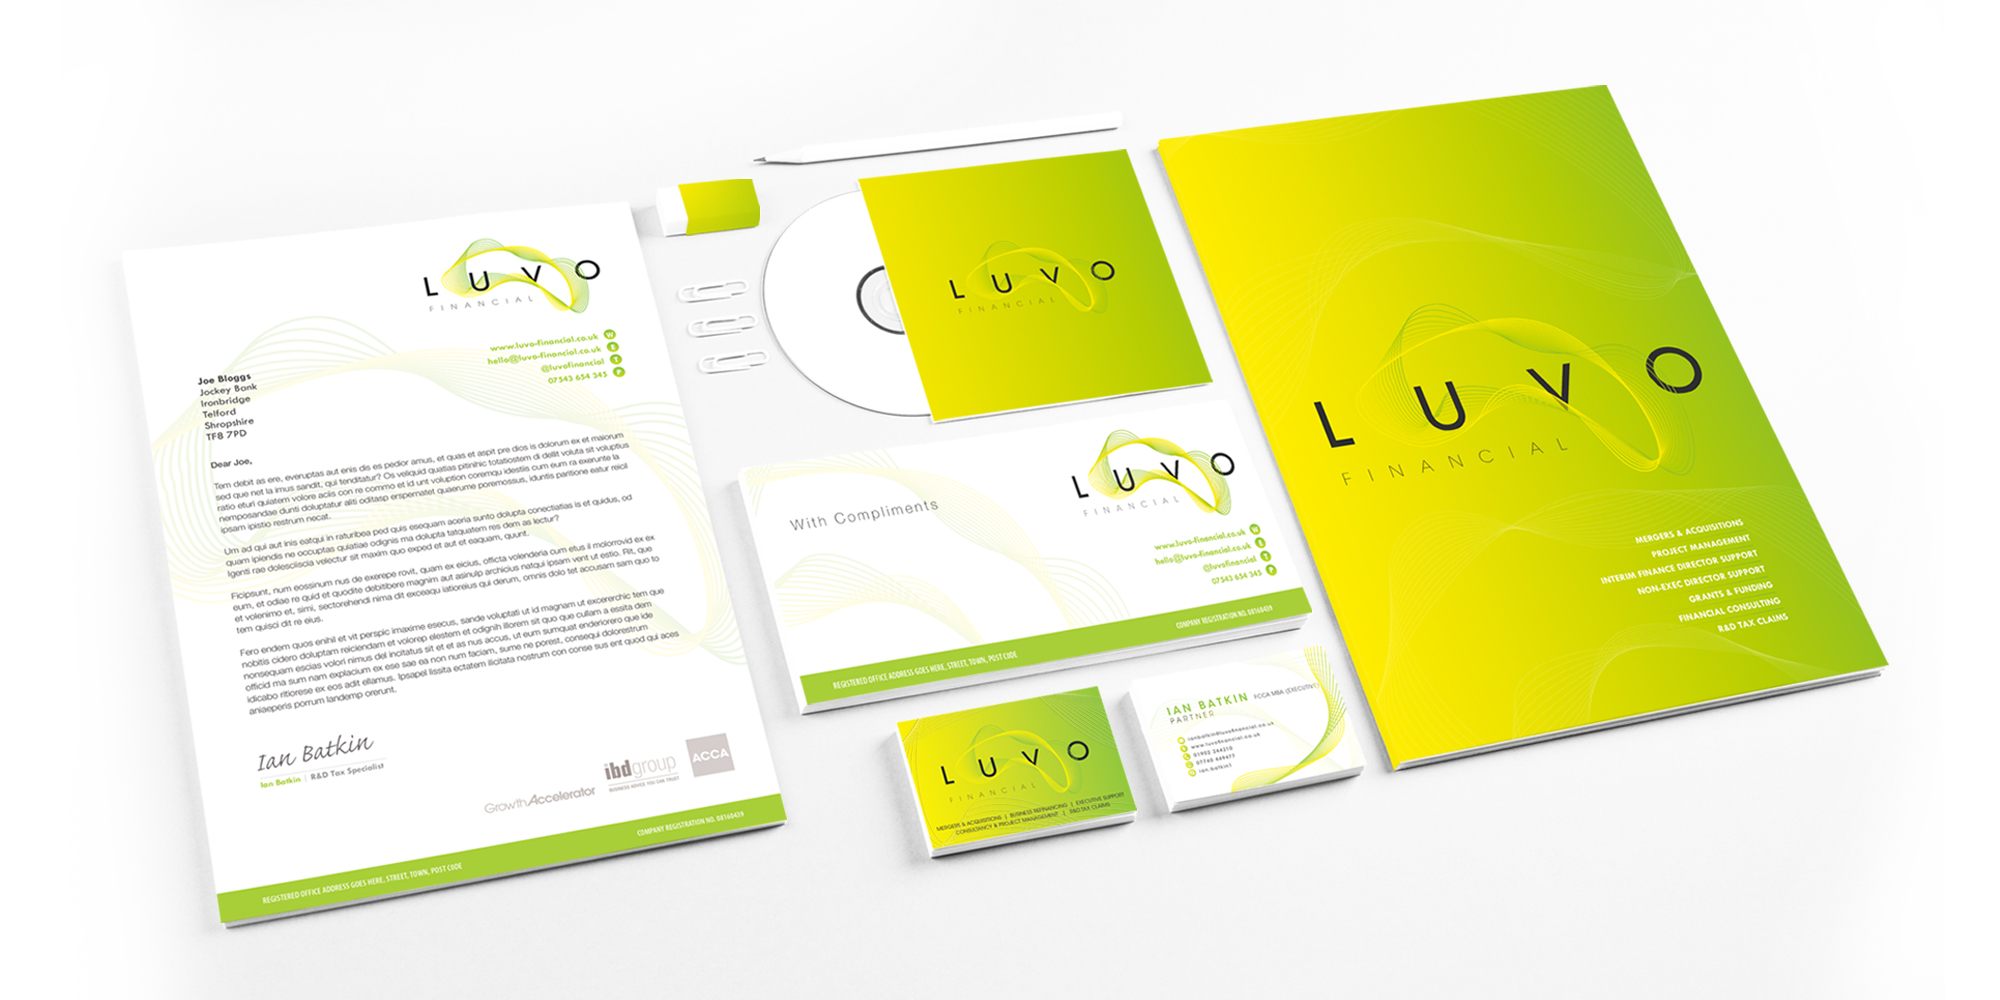 Luvo welcome pack image